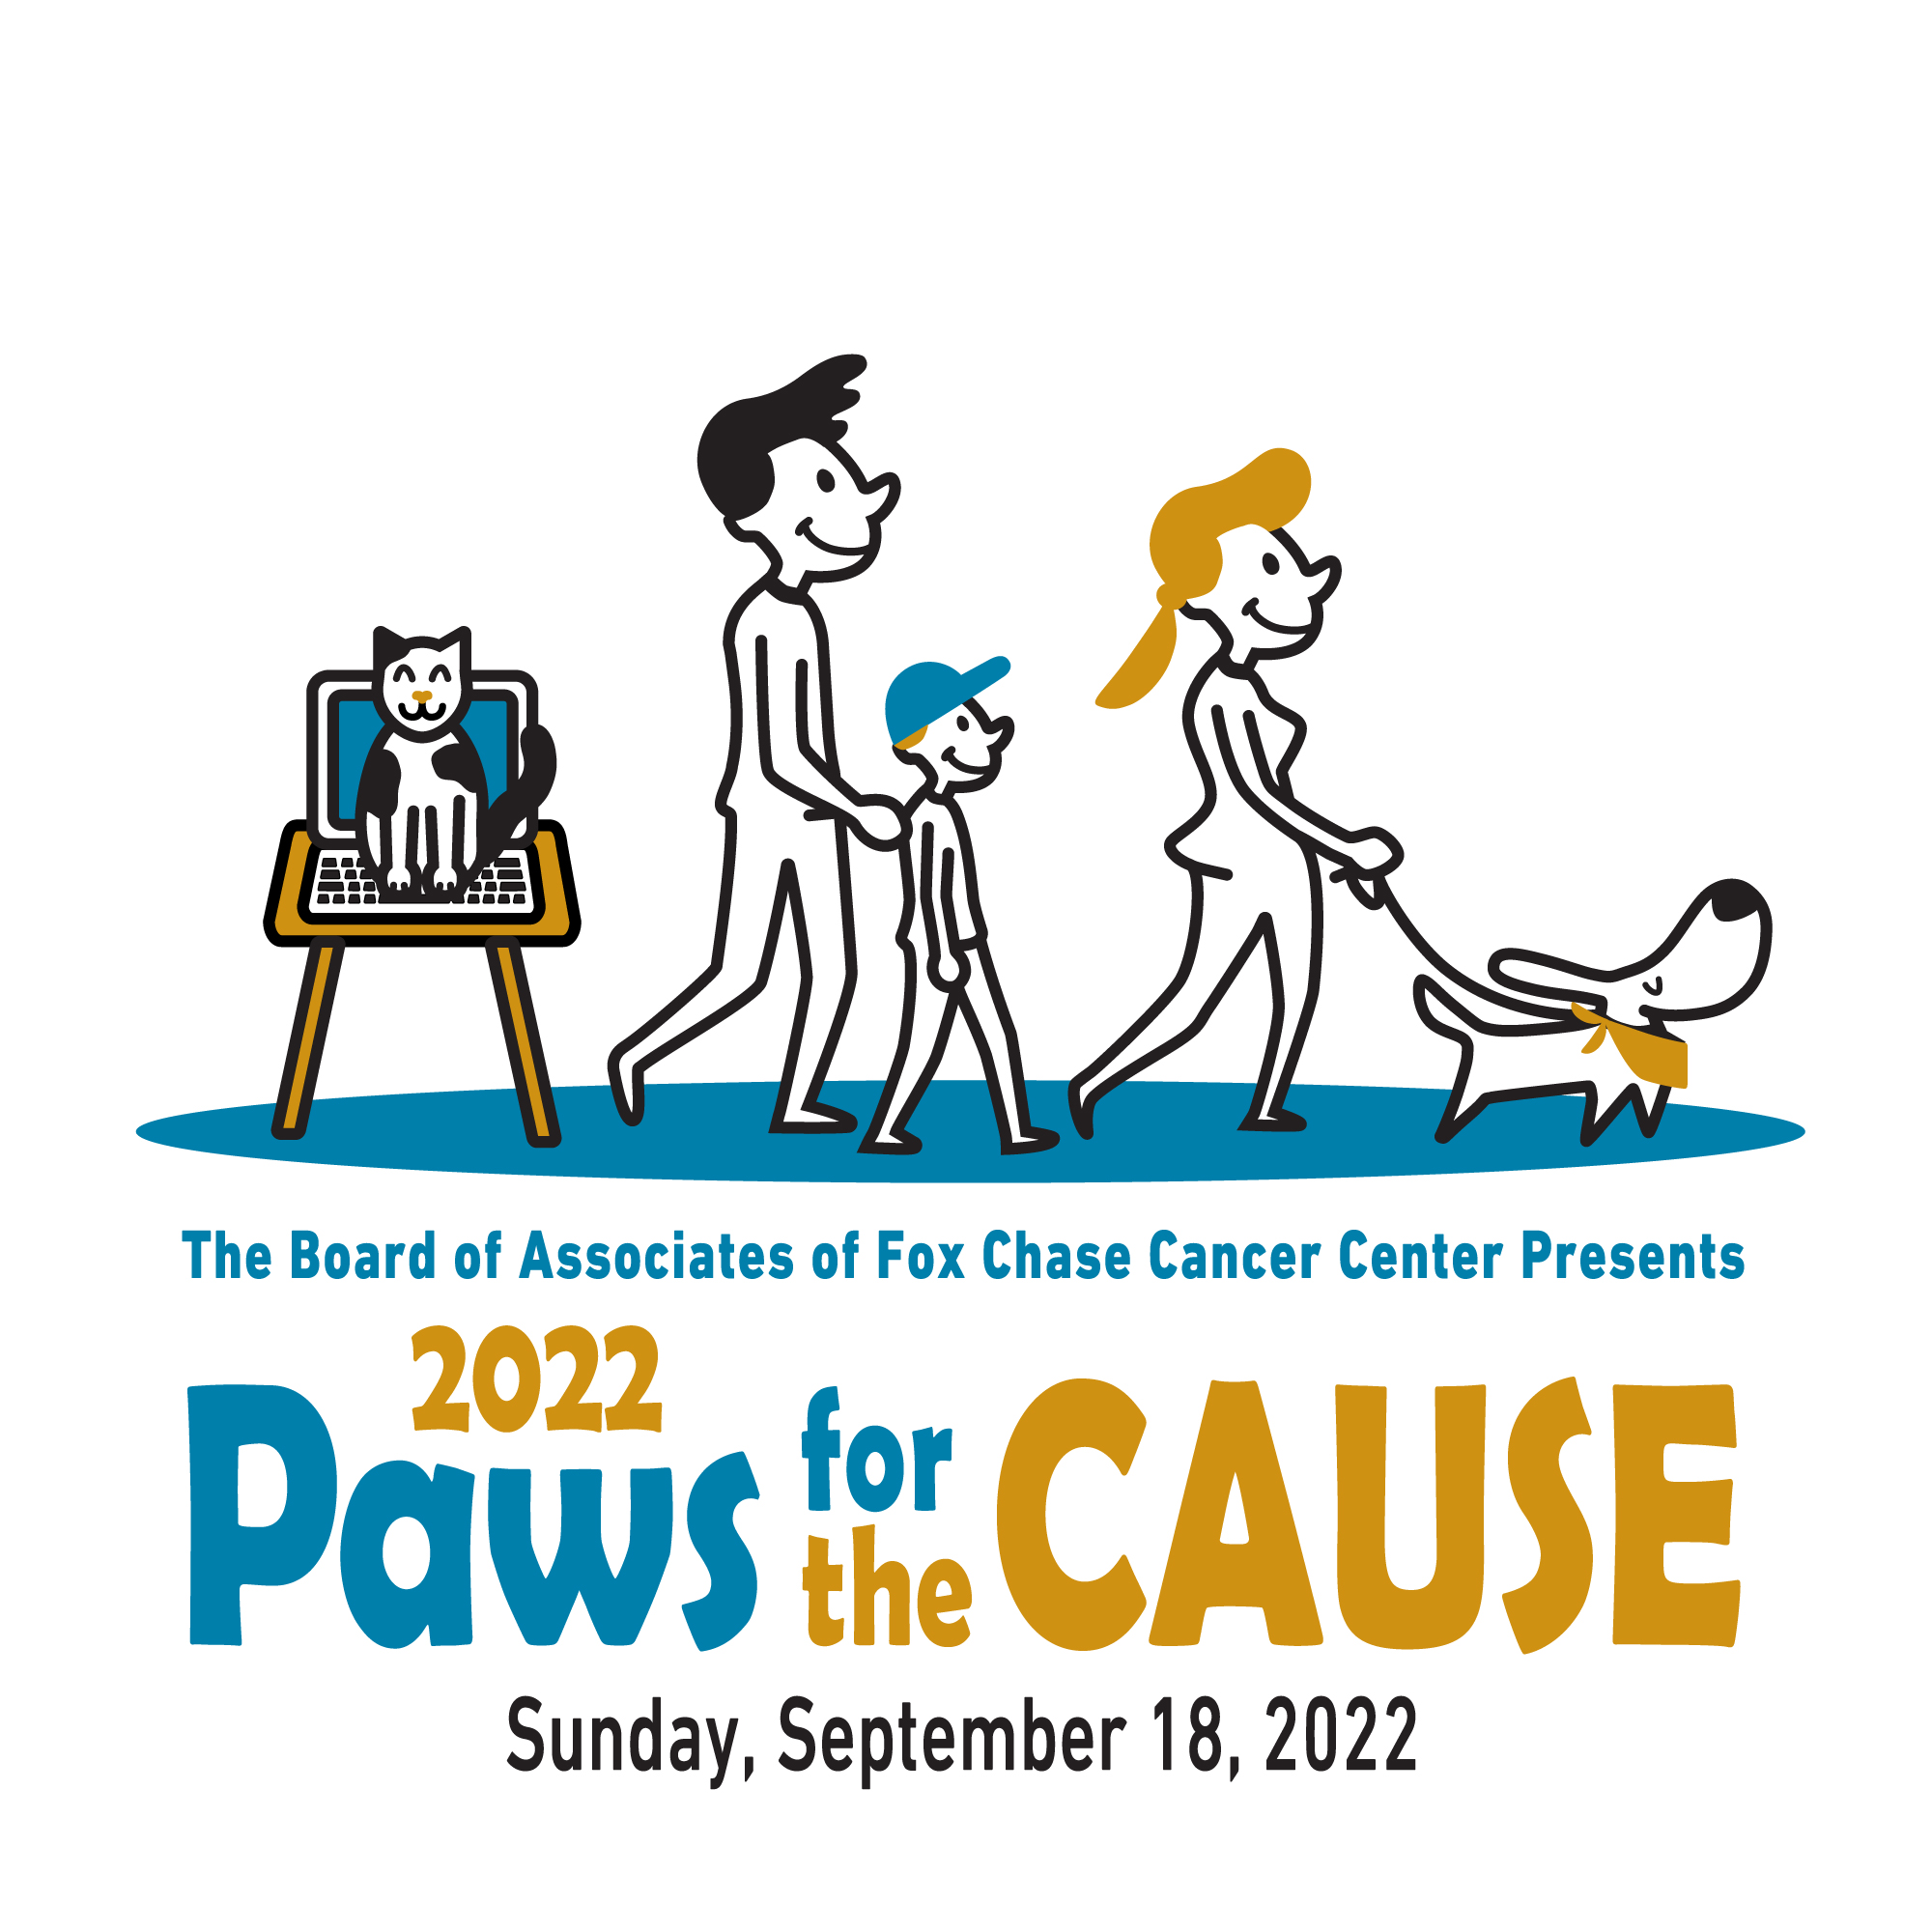 Paws for the Cause 2022